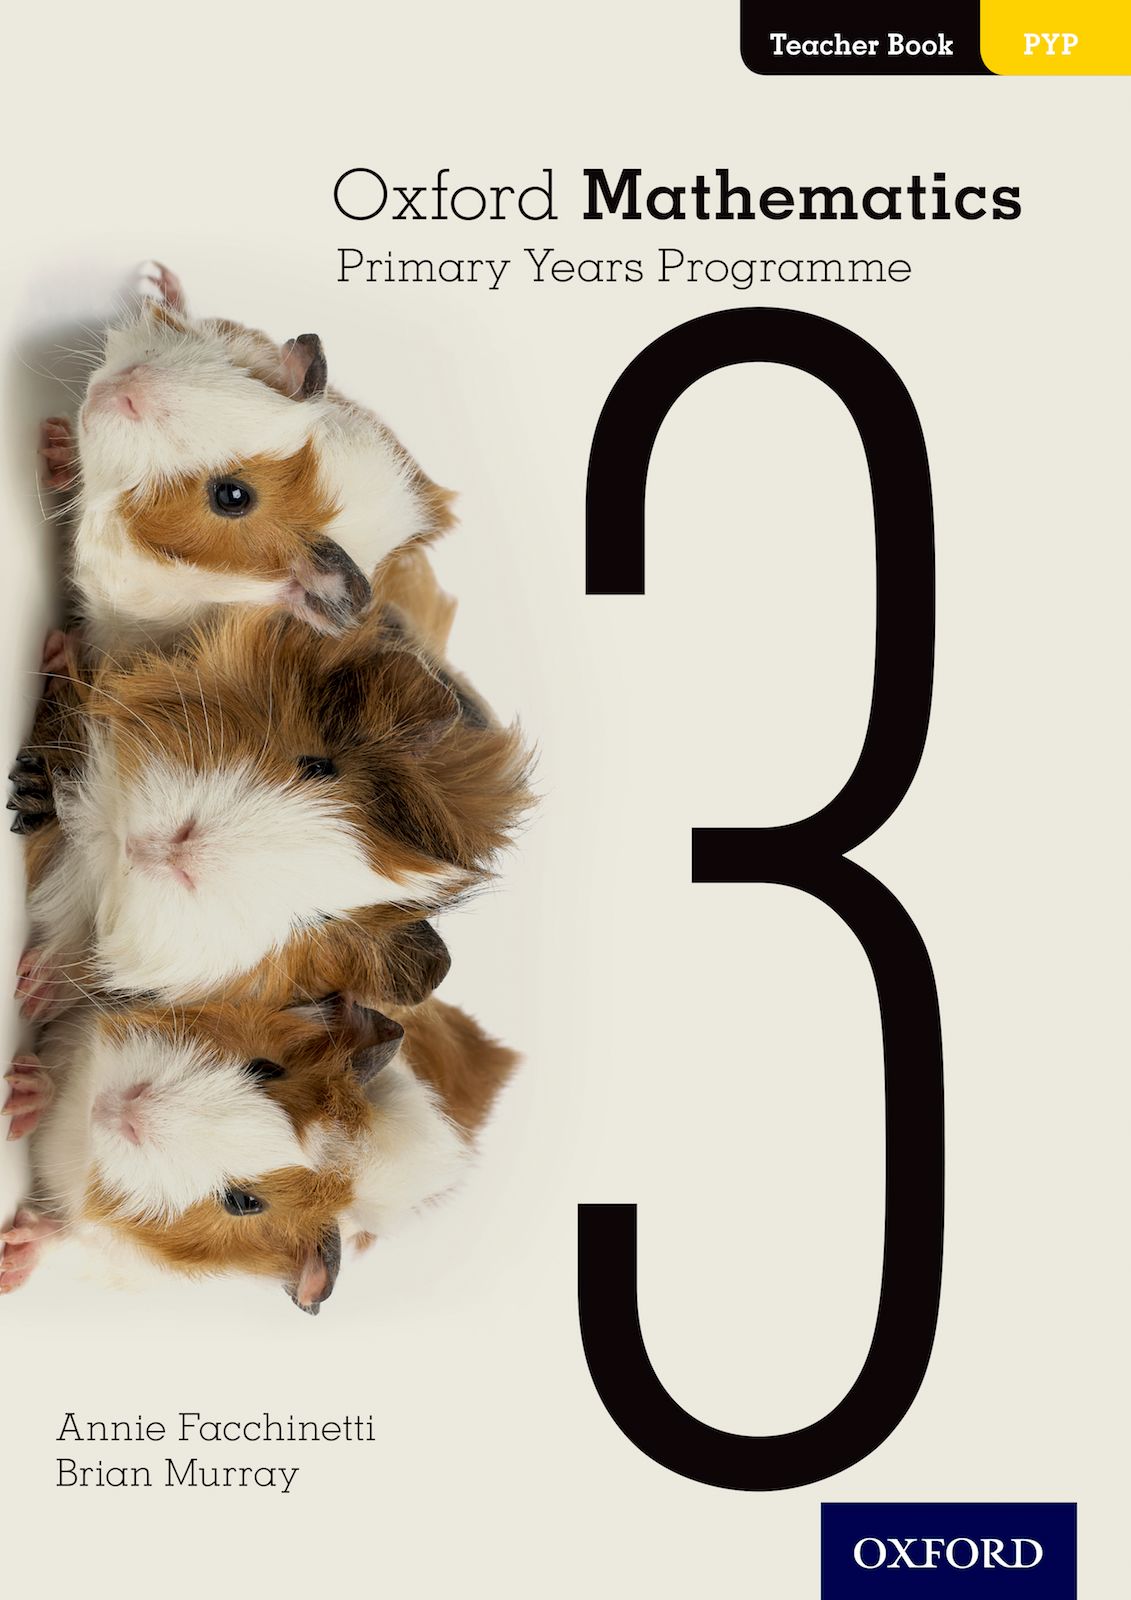 Featured image for “Oxford Mathematics Primary Years Programme Teacher Book 3”